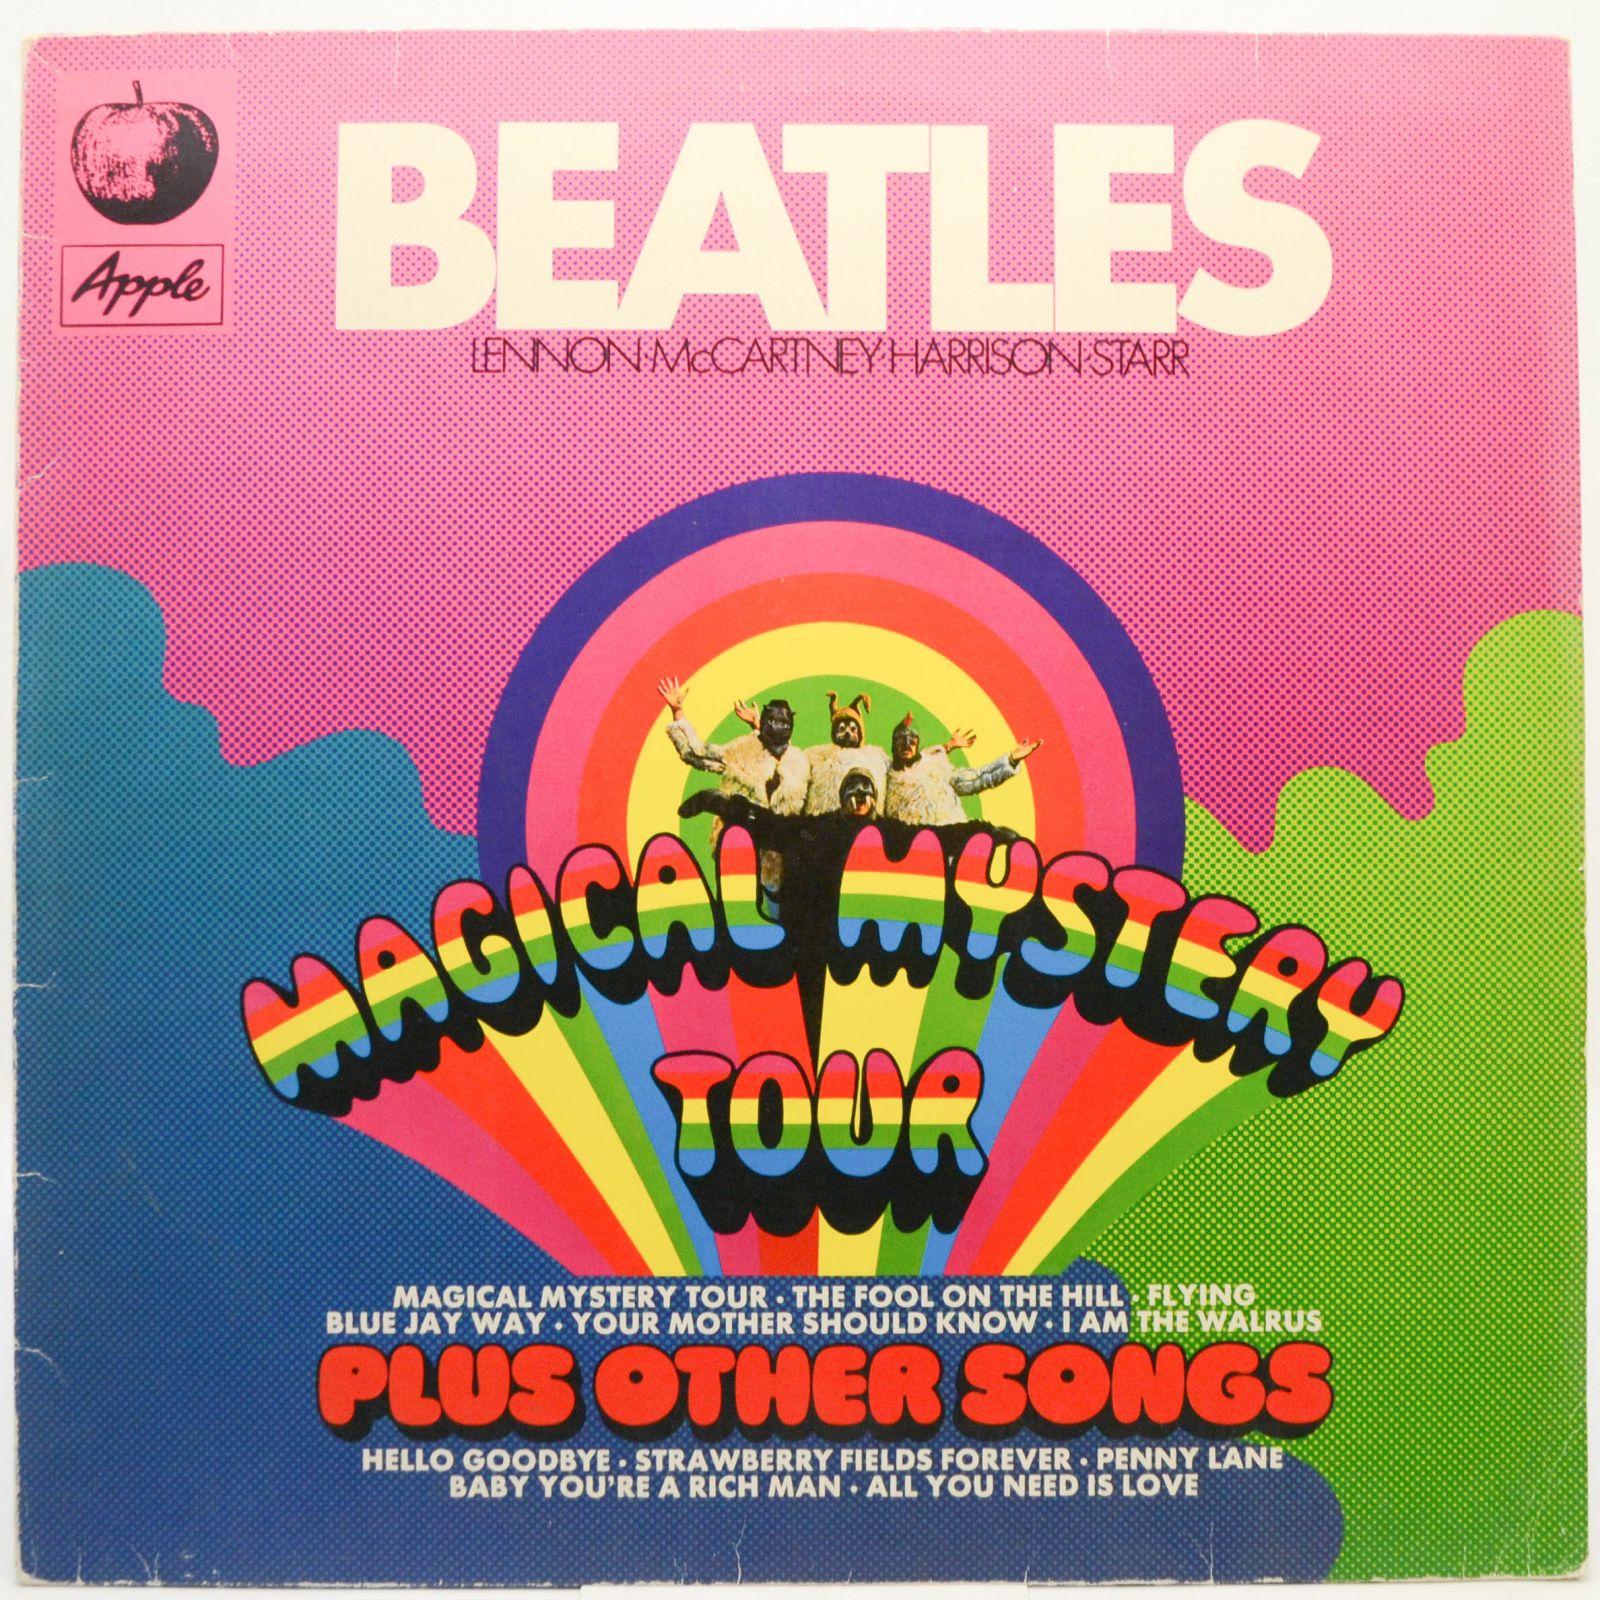 Beatles — Magical Mystery Tour Plus Other Songs, 1967